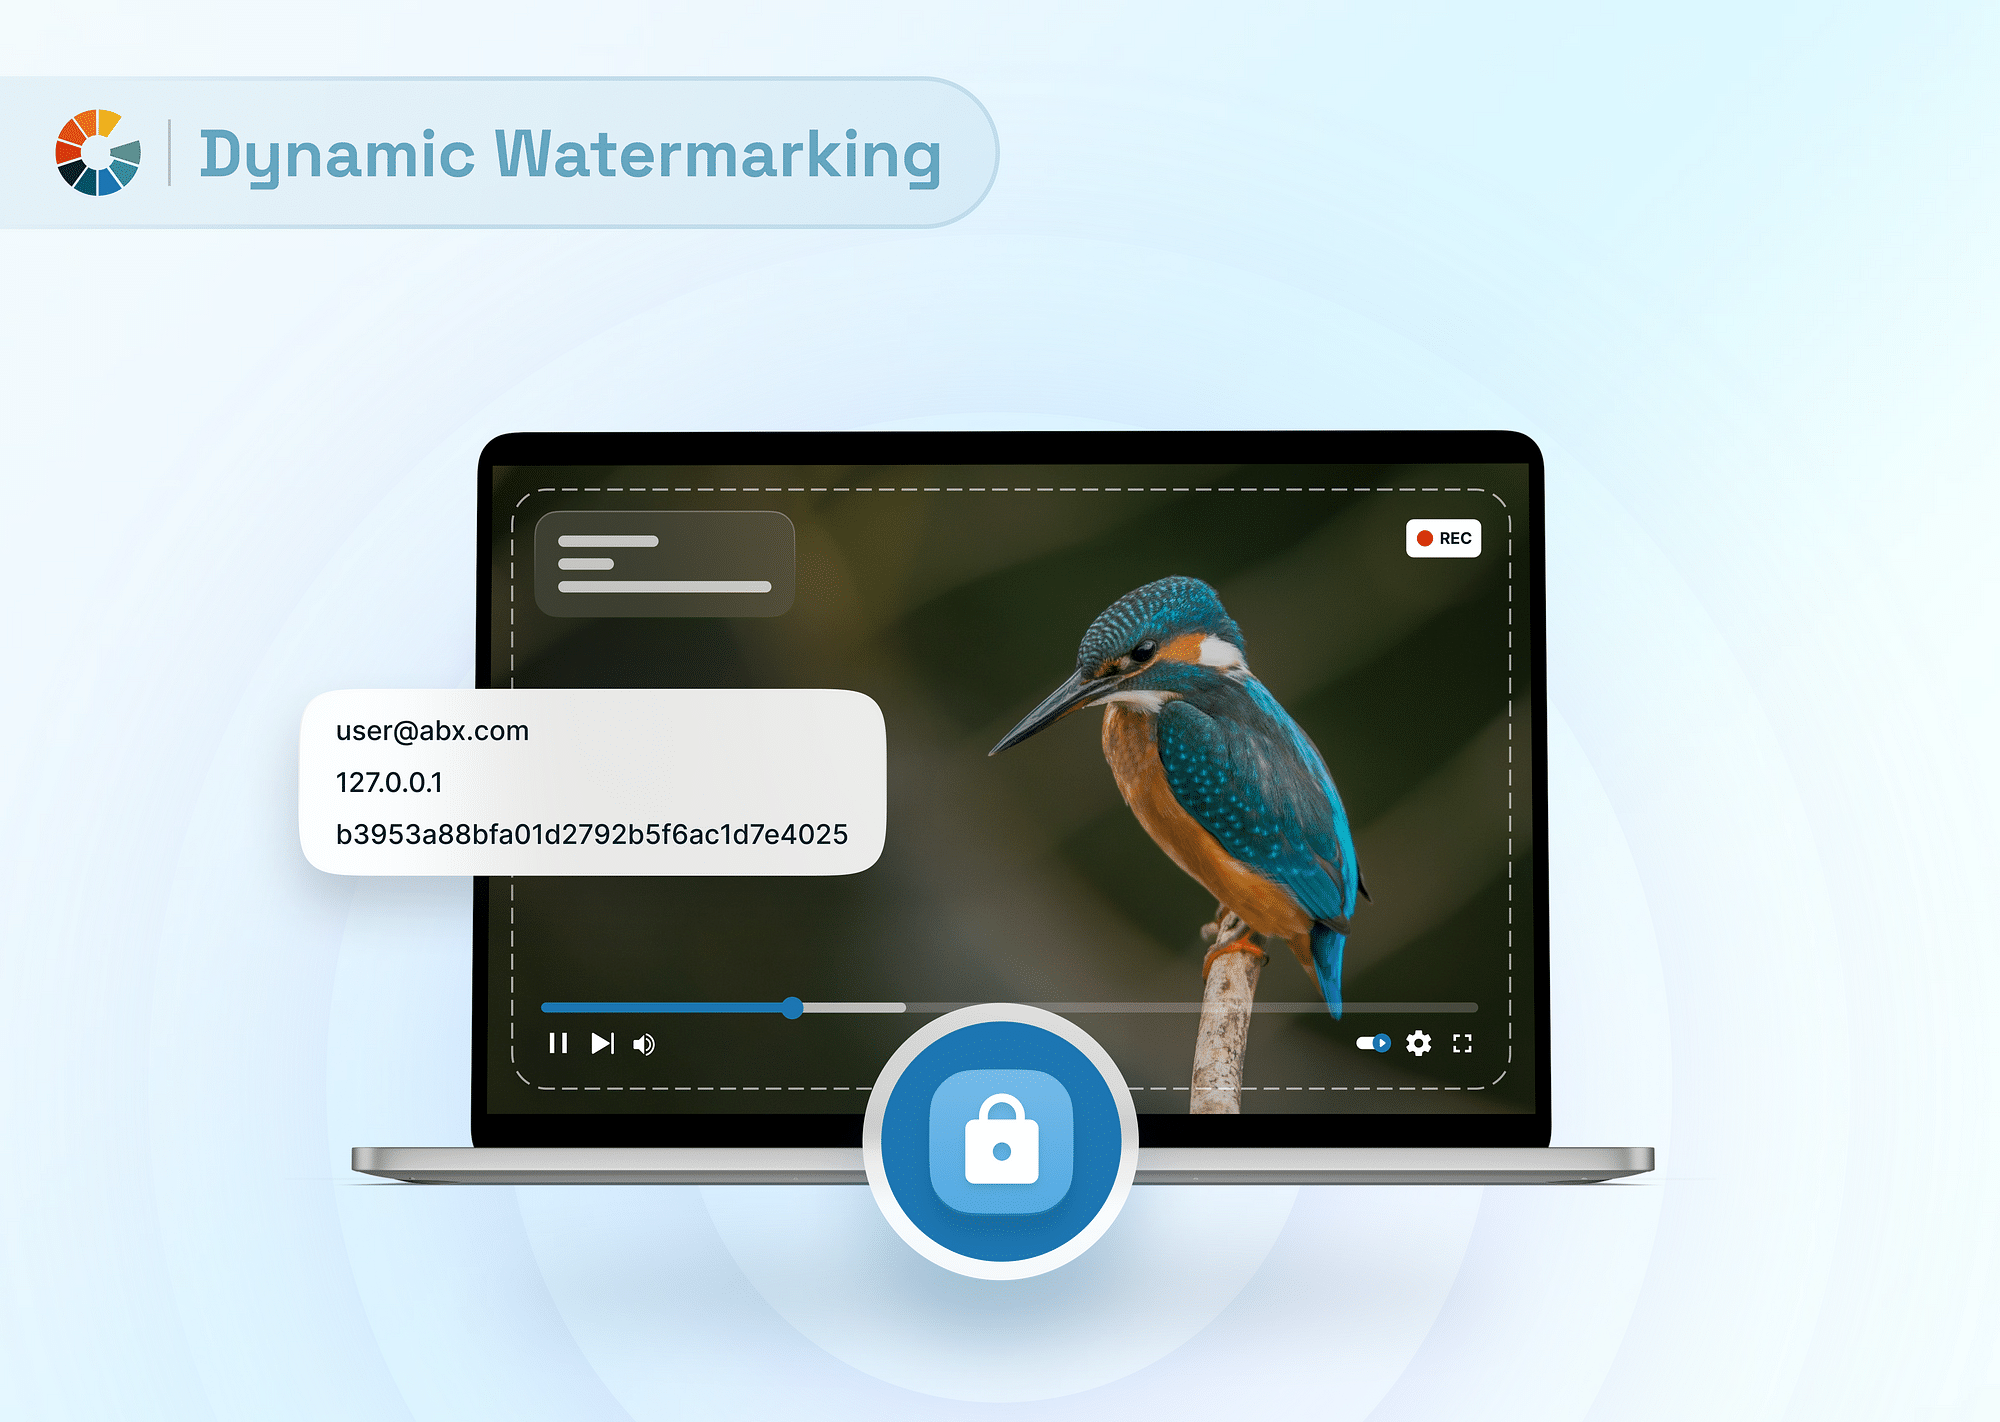 How to Add Dynamic Watermarking to Your Videos?